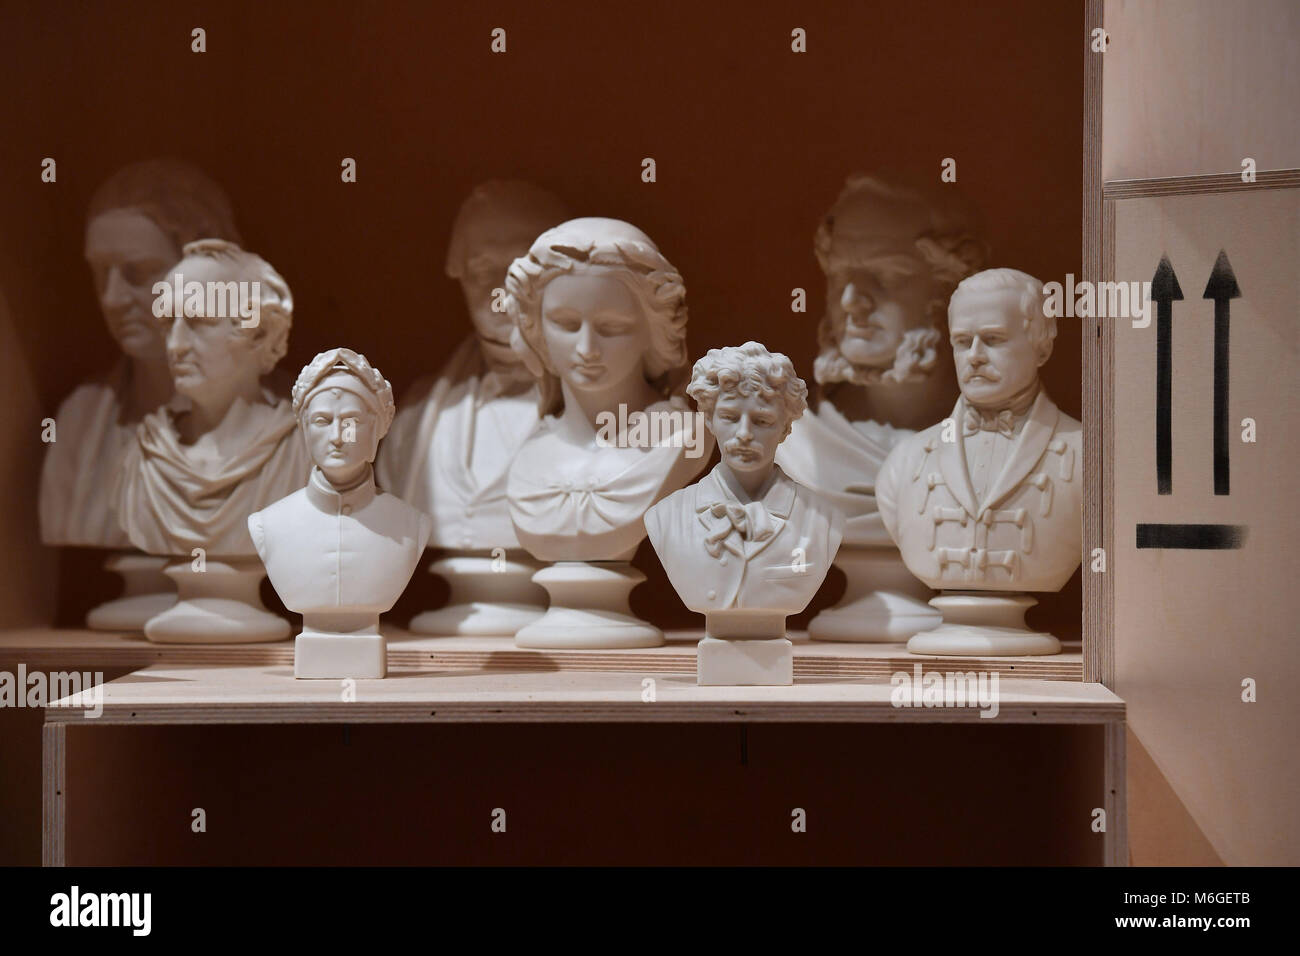 Parian busts of historical figures on display in the 'Flux: Parian unpacked' contemporary exhibition by artist Matt Smith, which opens at the Fitzwilliam Museum in Cambridge on March 6. Stock Photo